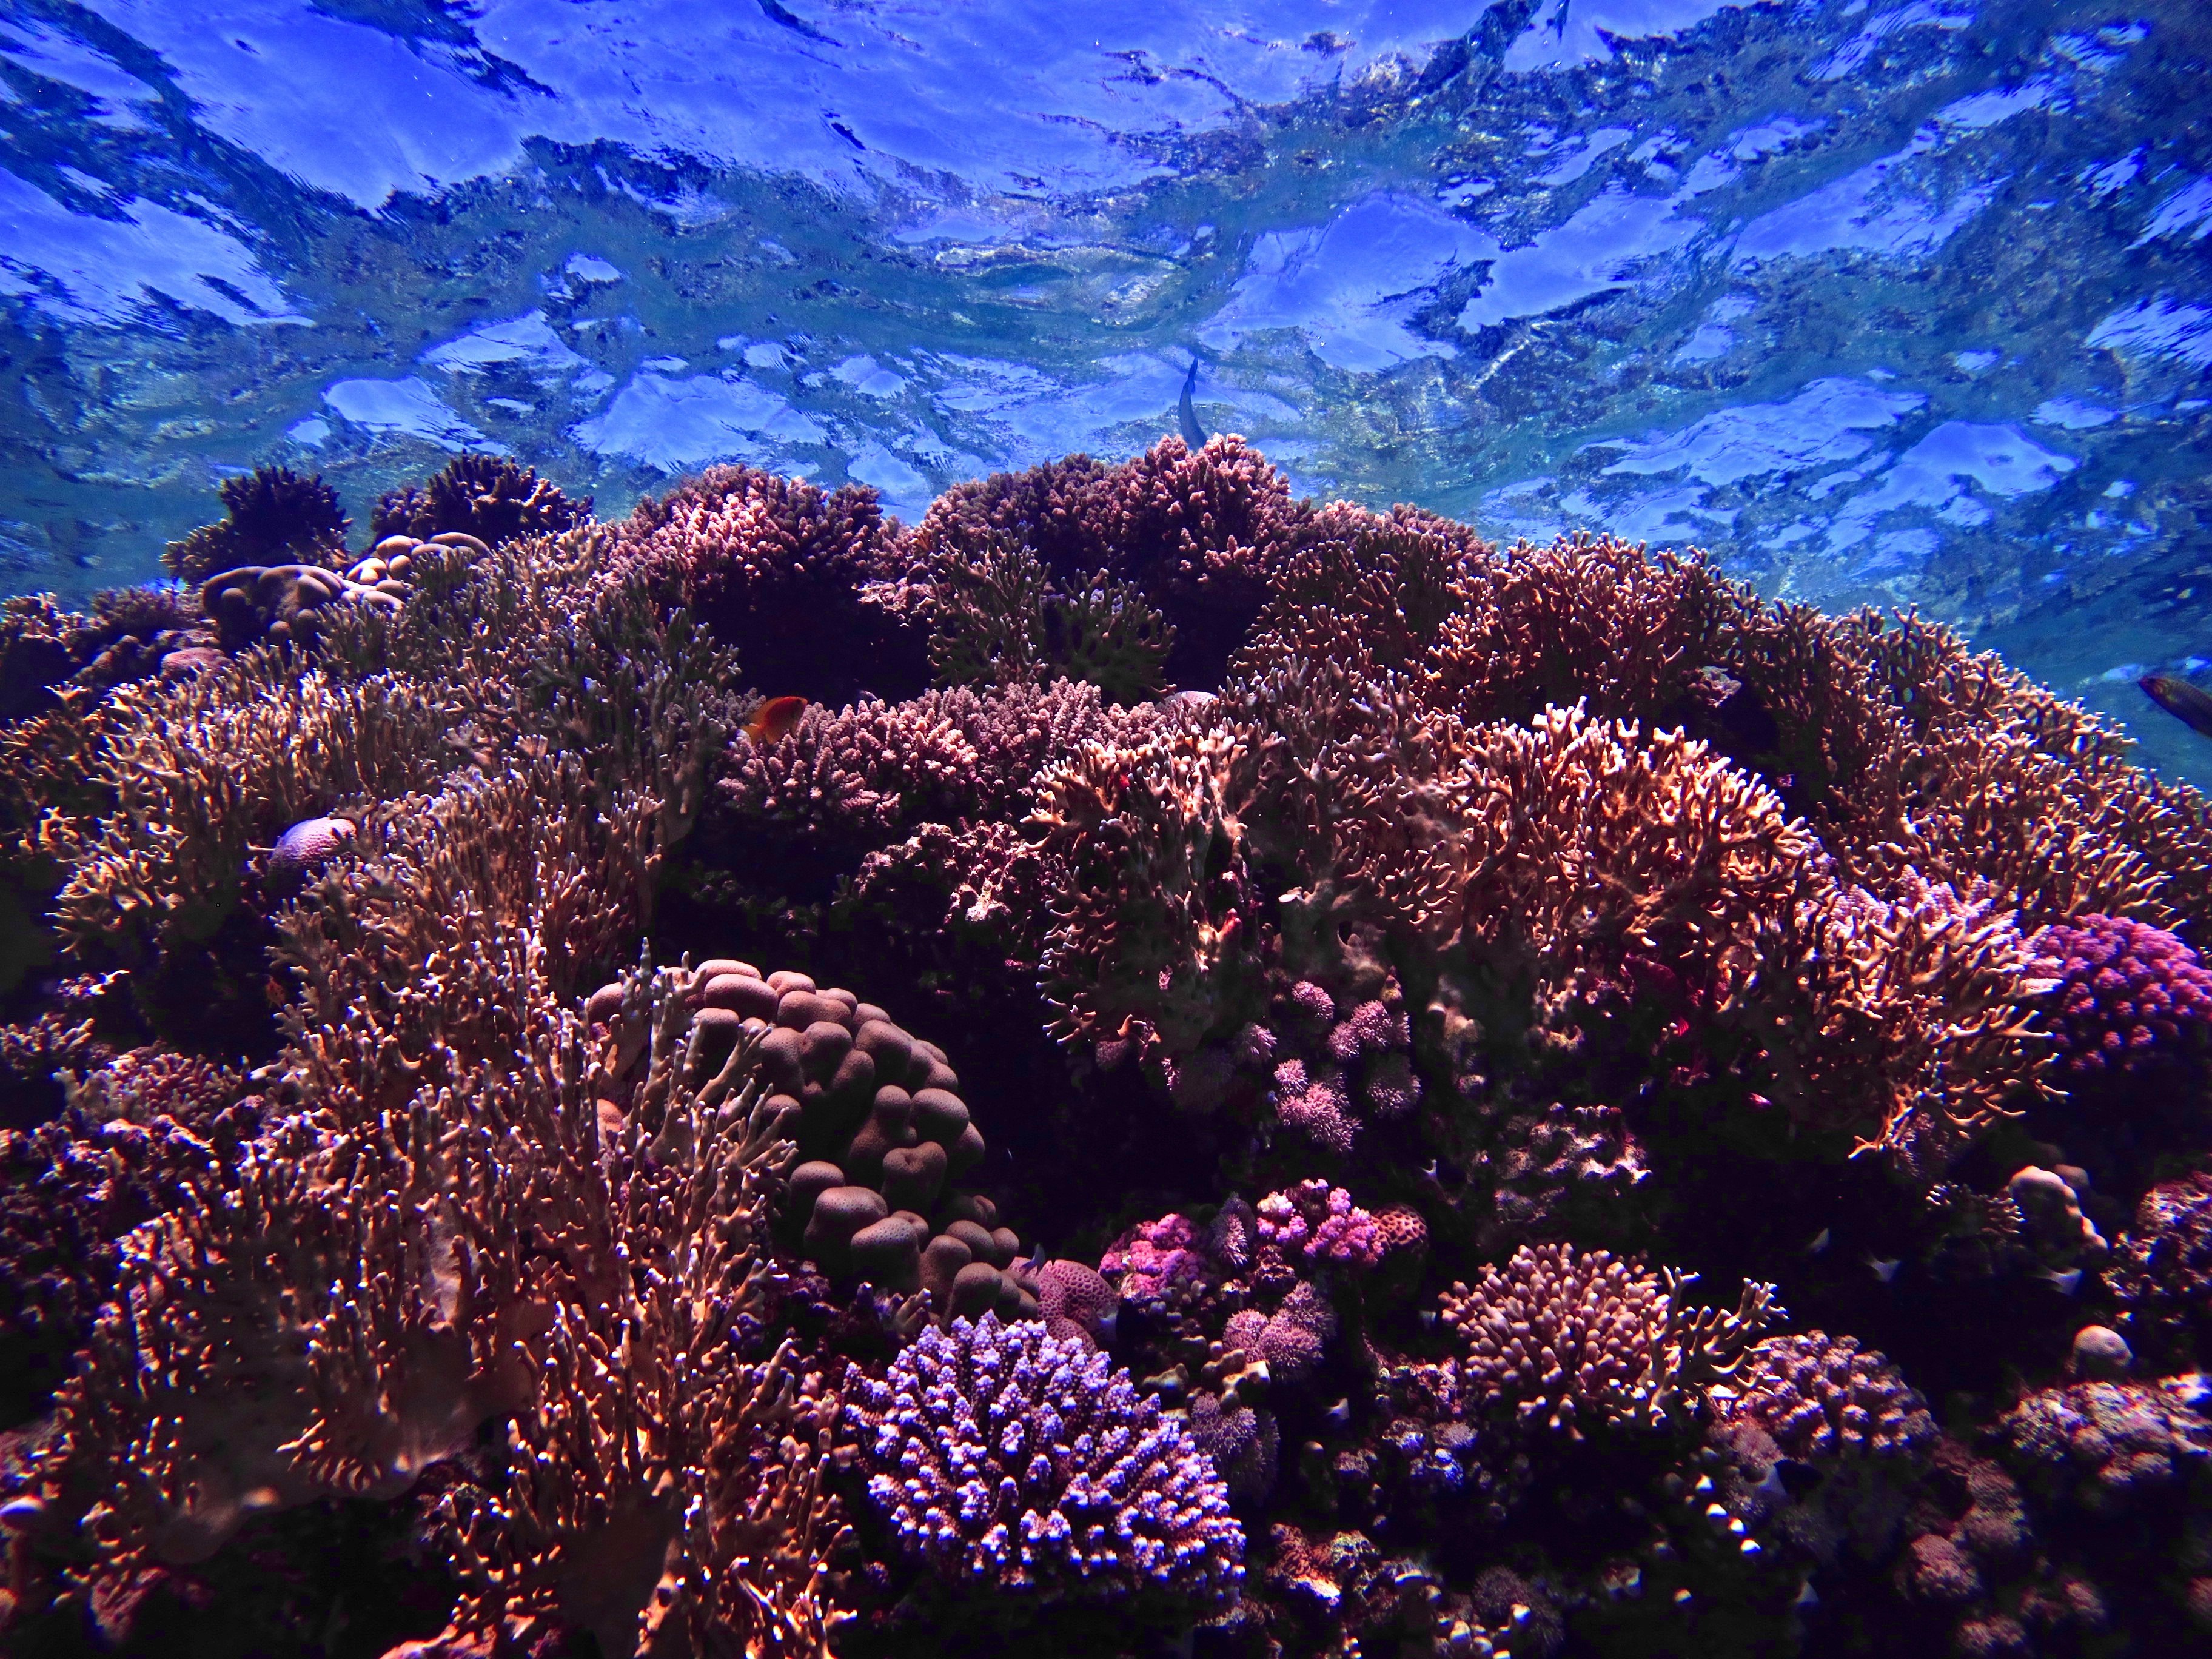 green and brown coral reef